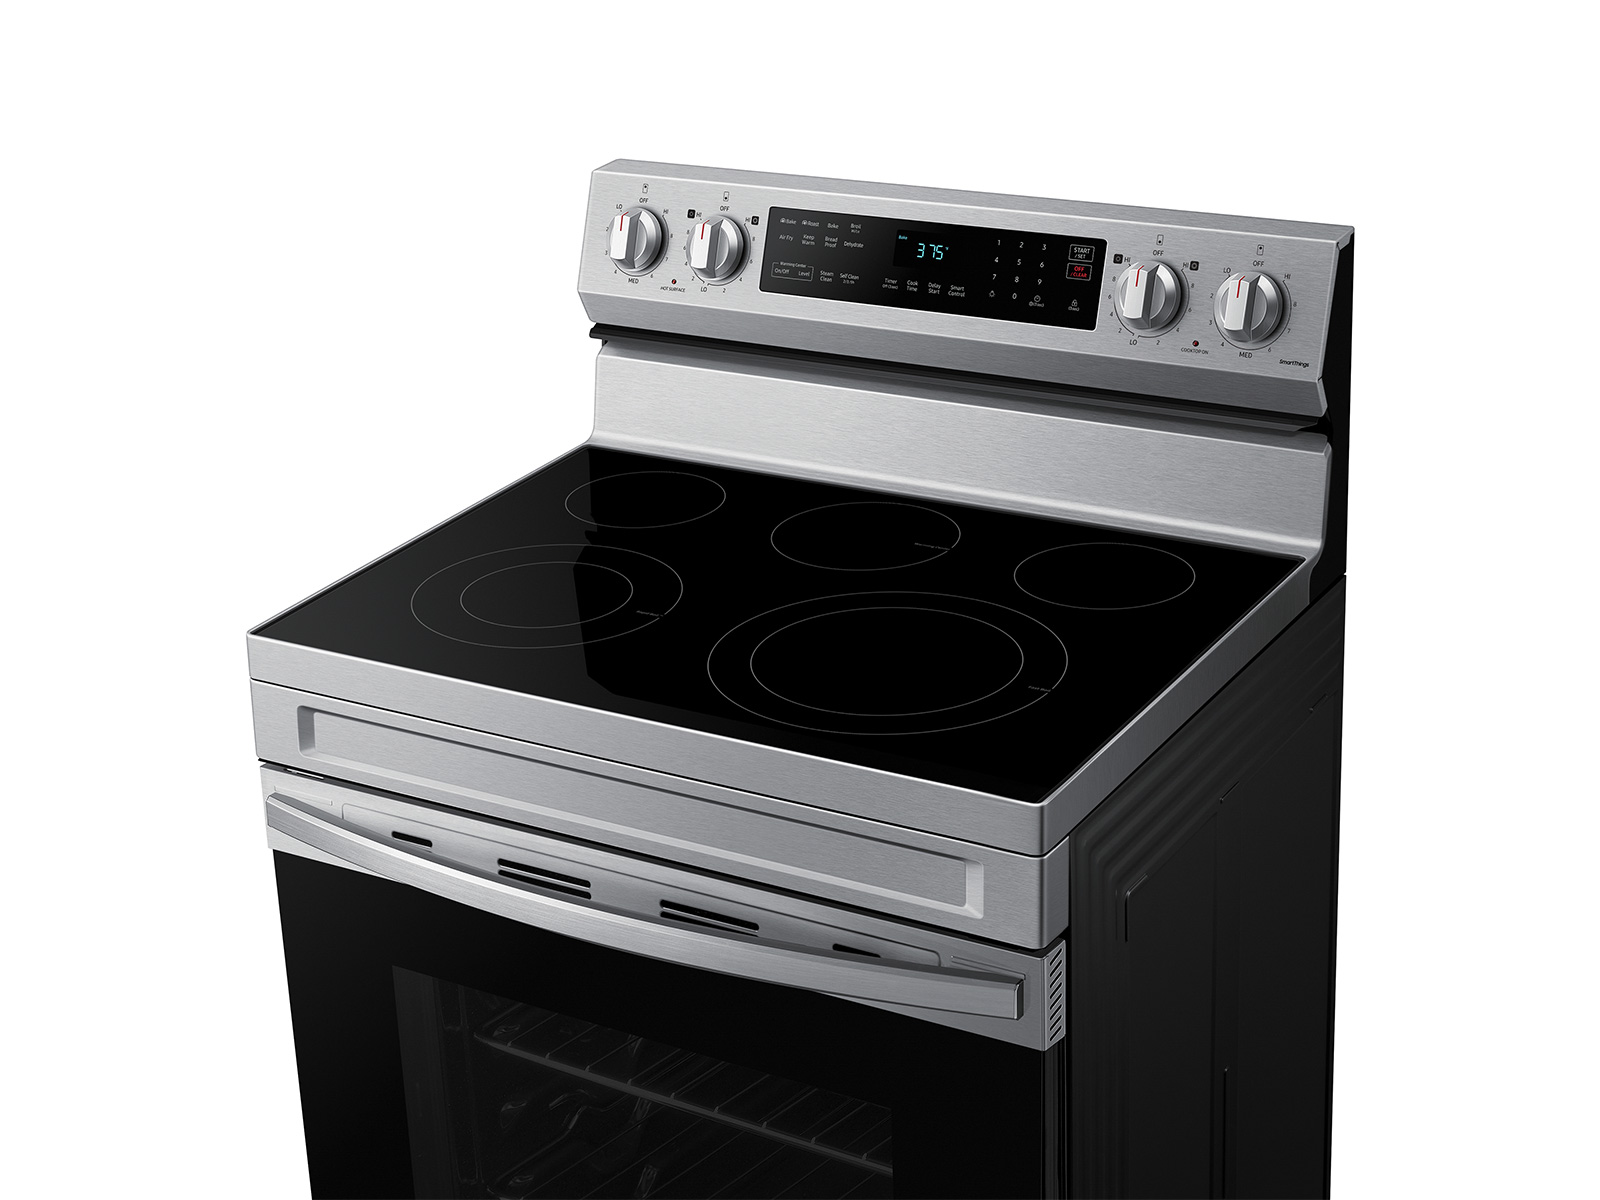 Samsung NE63A6511SS Freestanding Electric Range Review - Reviewed